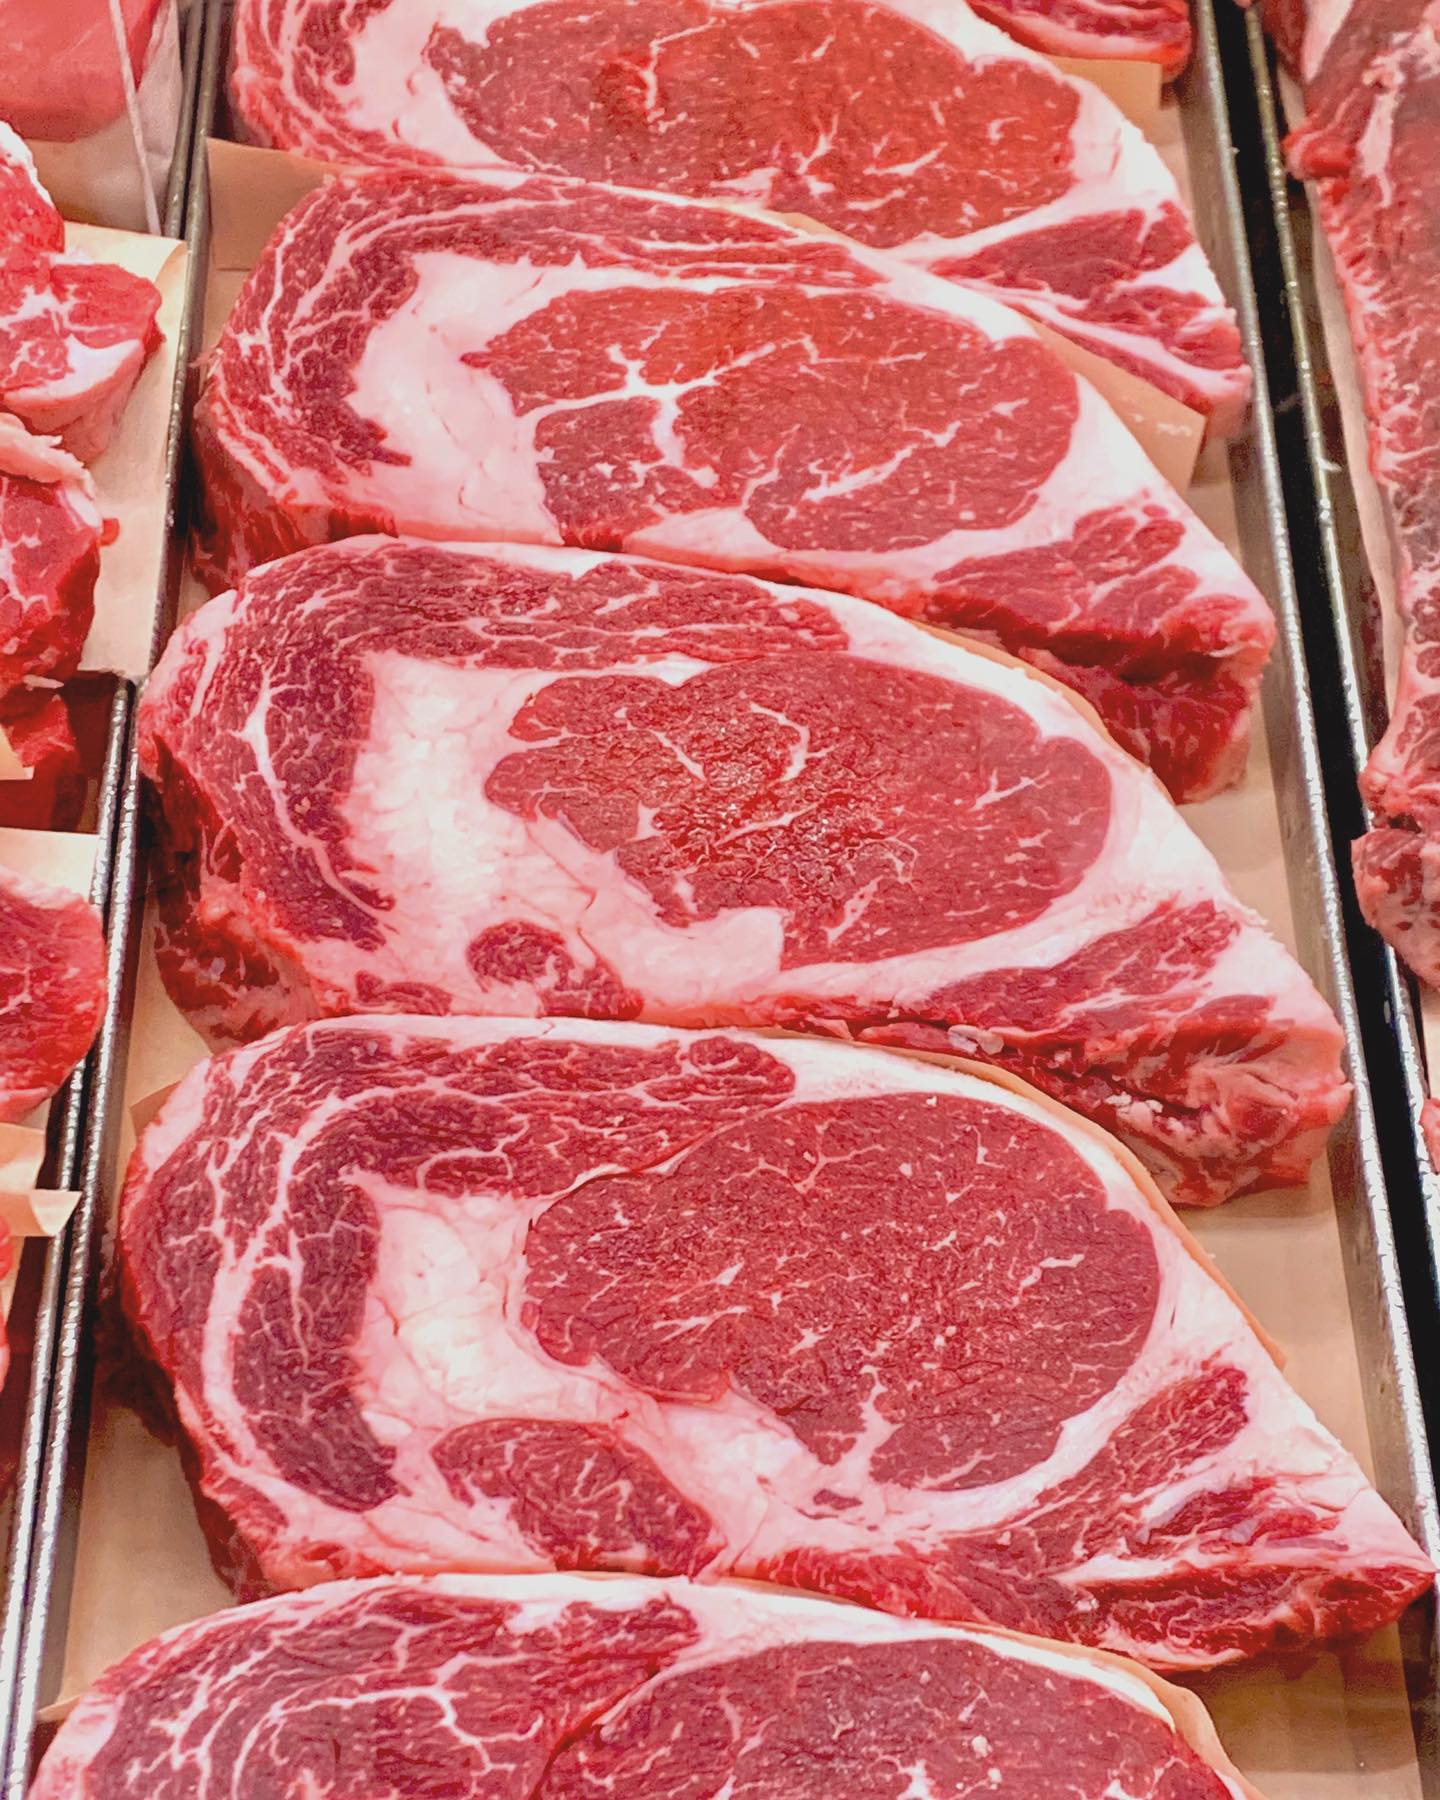 Should we be concerned about 'ungraded beef' in grocery stores?